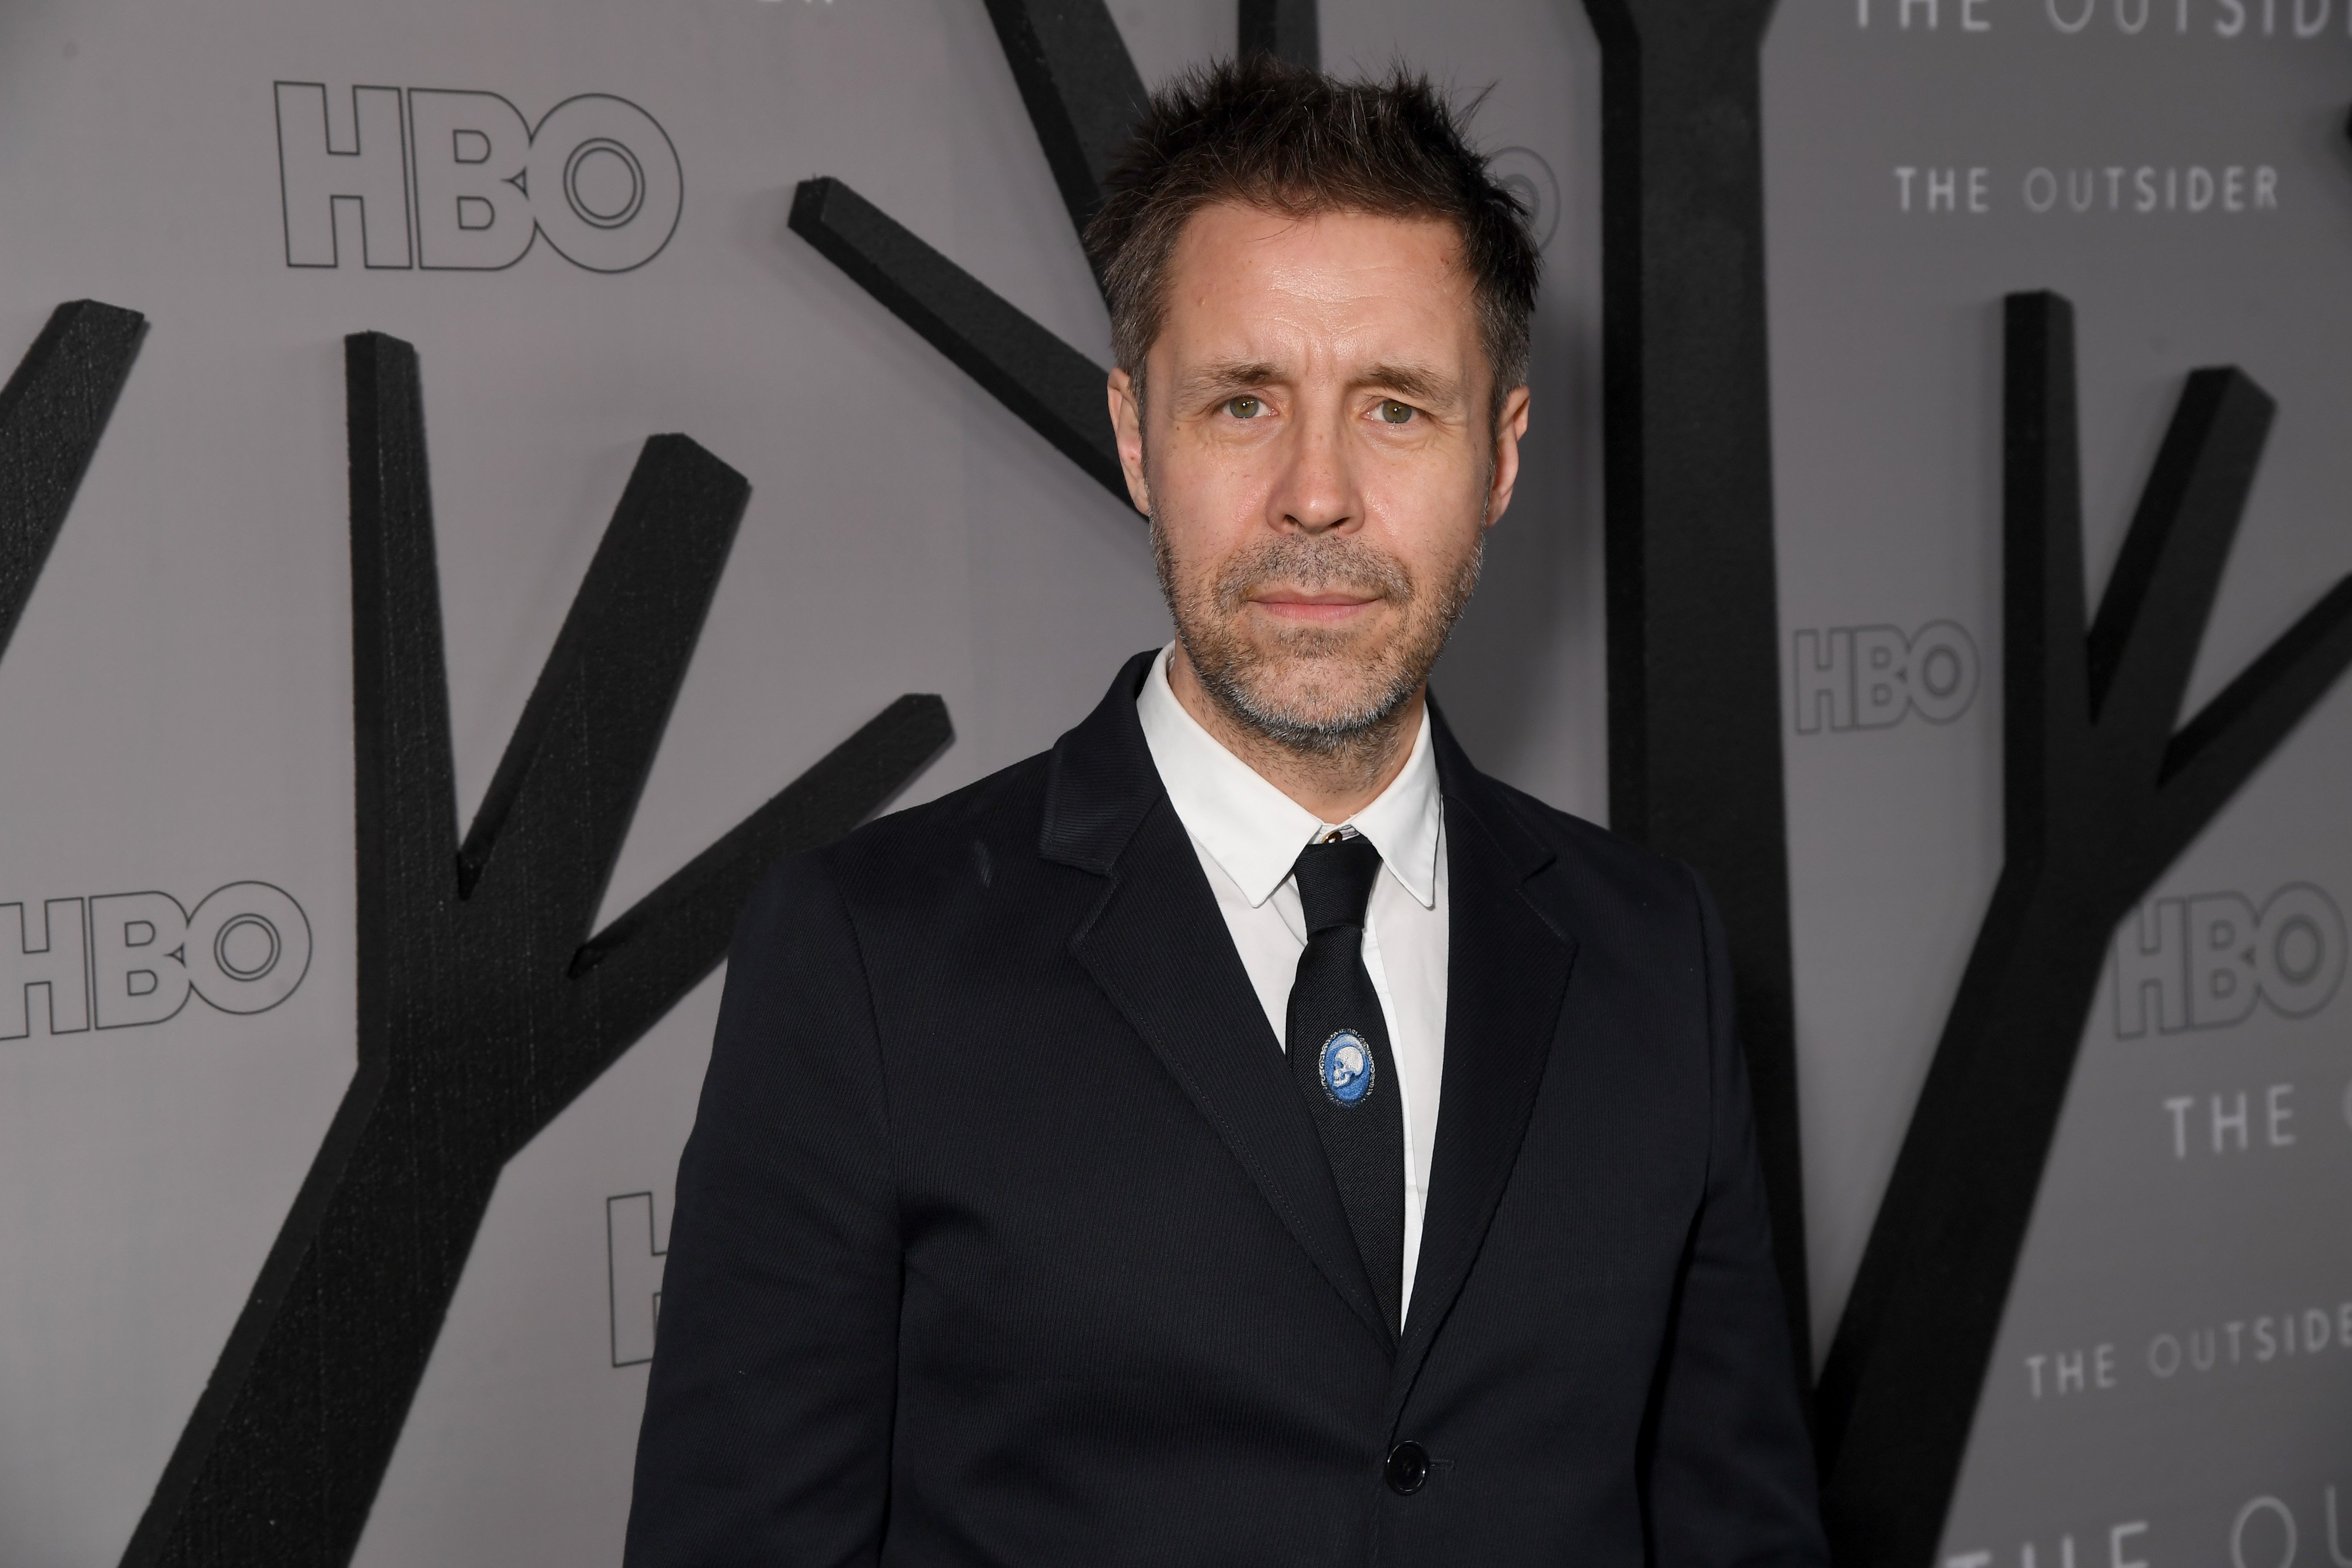 Paddy Considine at the Los Angeles premiere of "The Outsider" on January 9, 2020 | Source: Getty Images